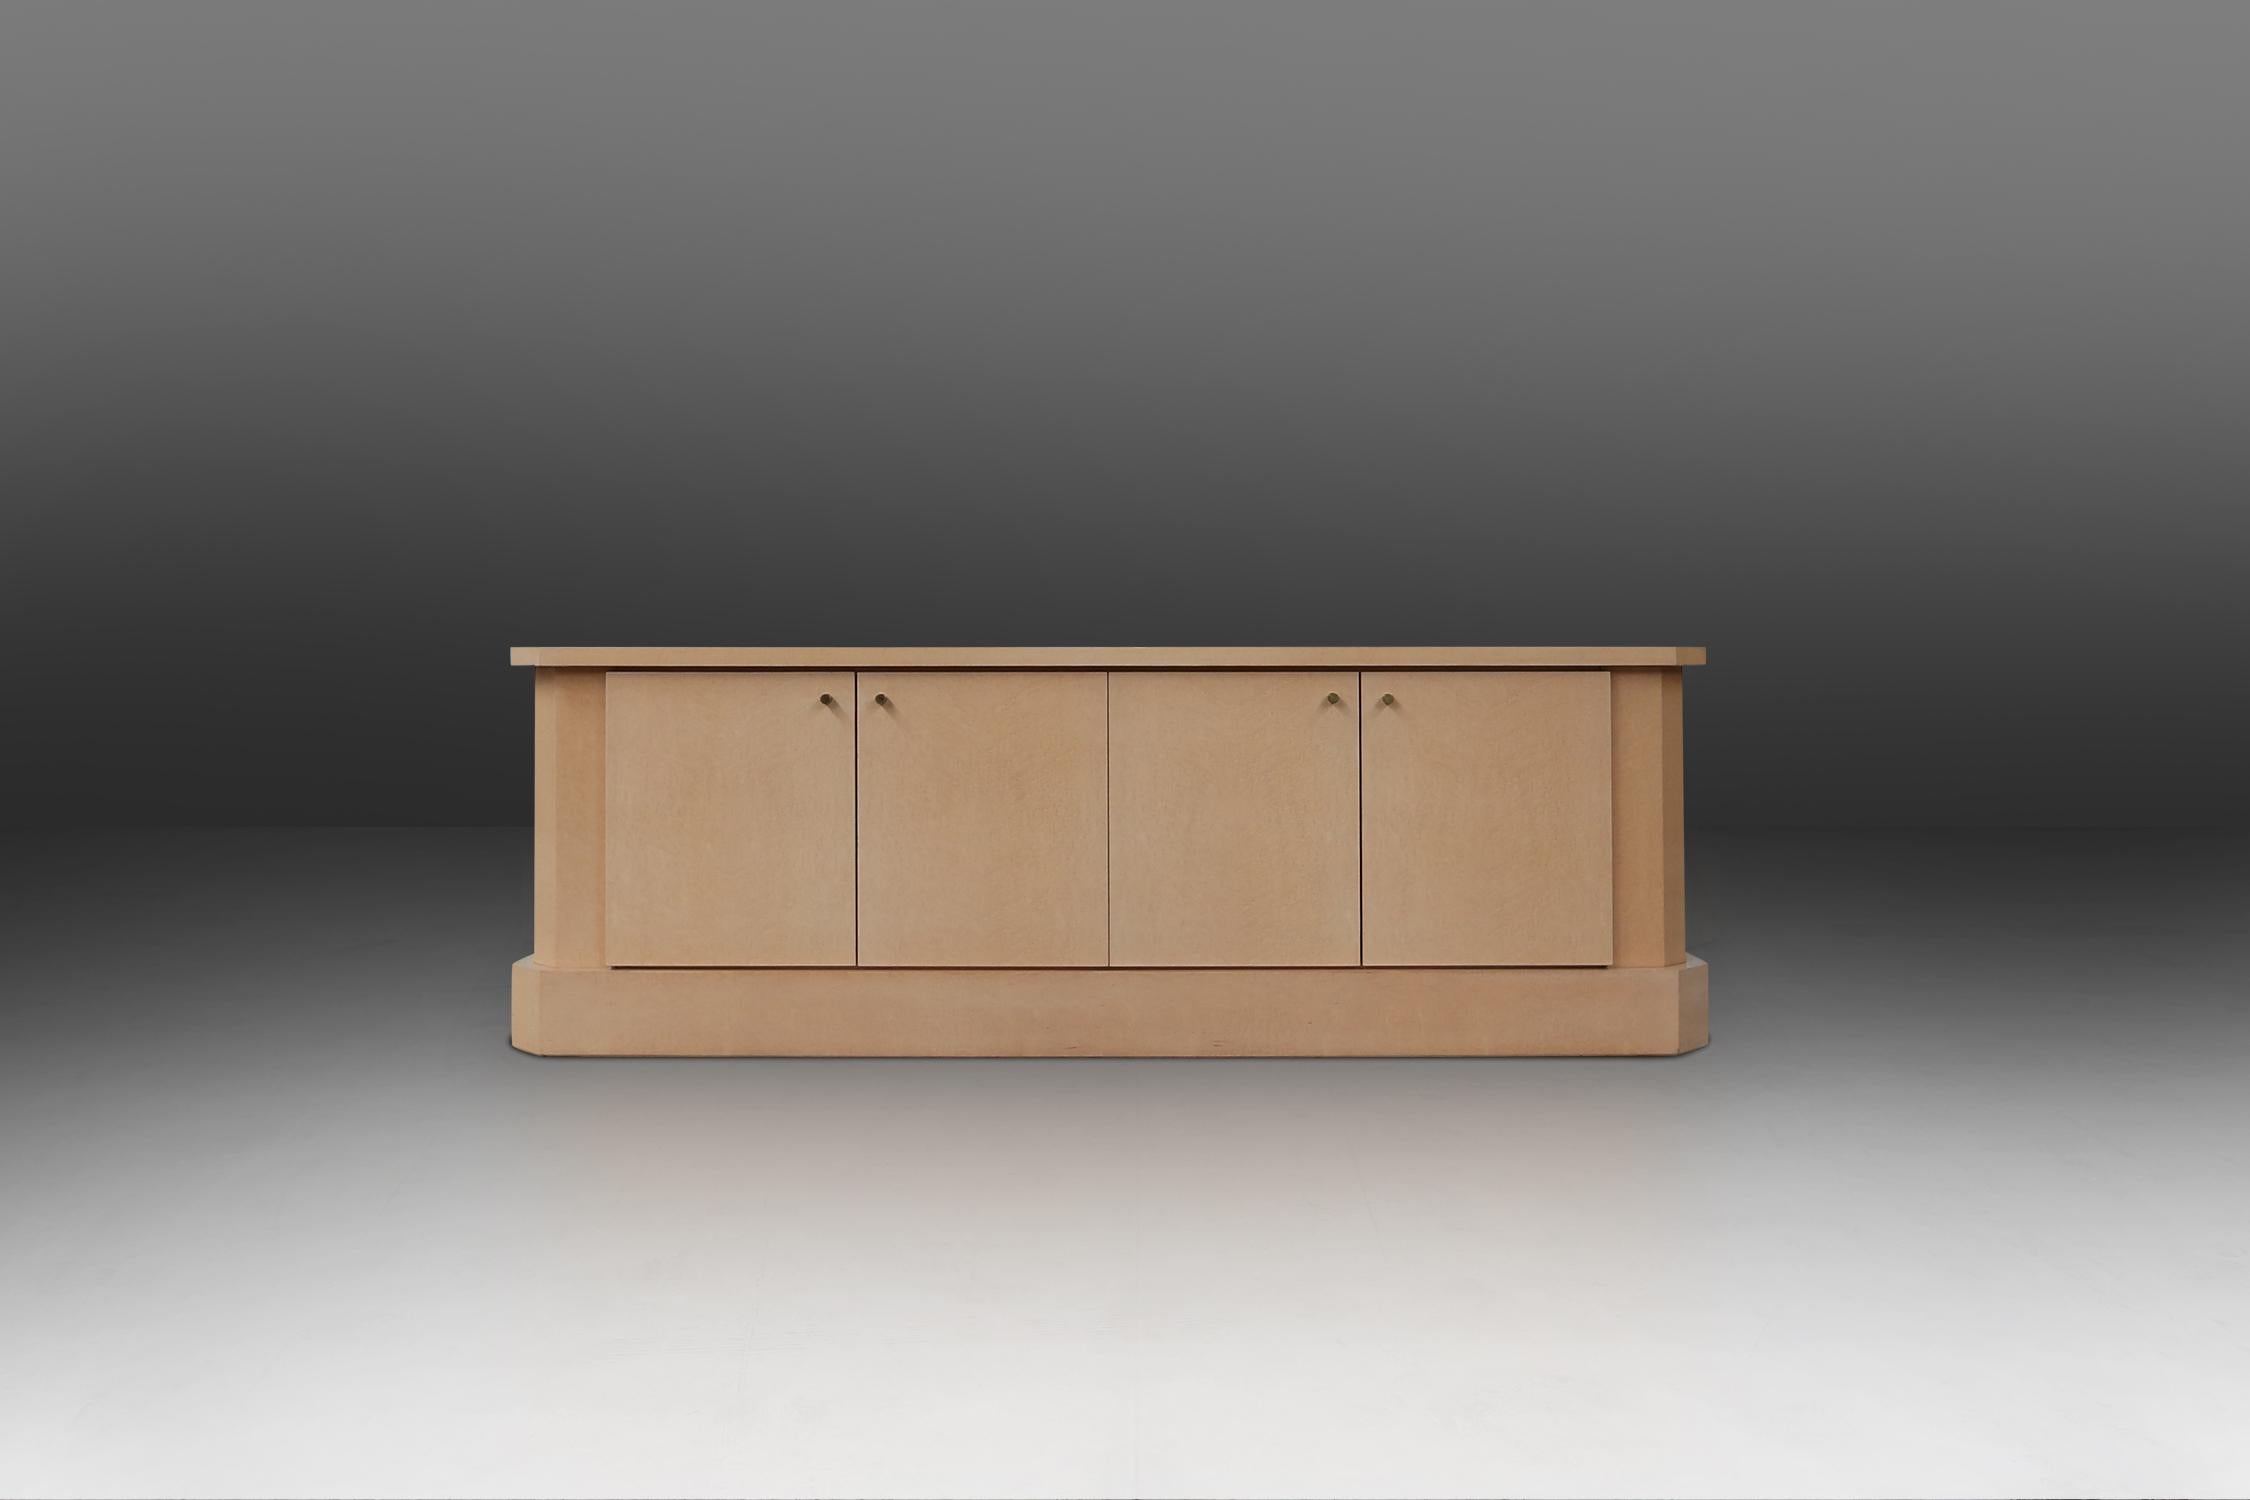 High quality sideboard by Belgian designer Jean Claude Dresse.
Made of burl wood with ivory lacquer. The 4 doors has brass pulls.
Interior with adjustable shelves.